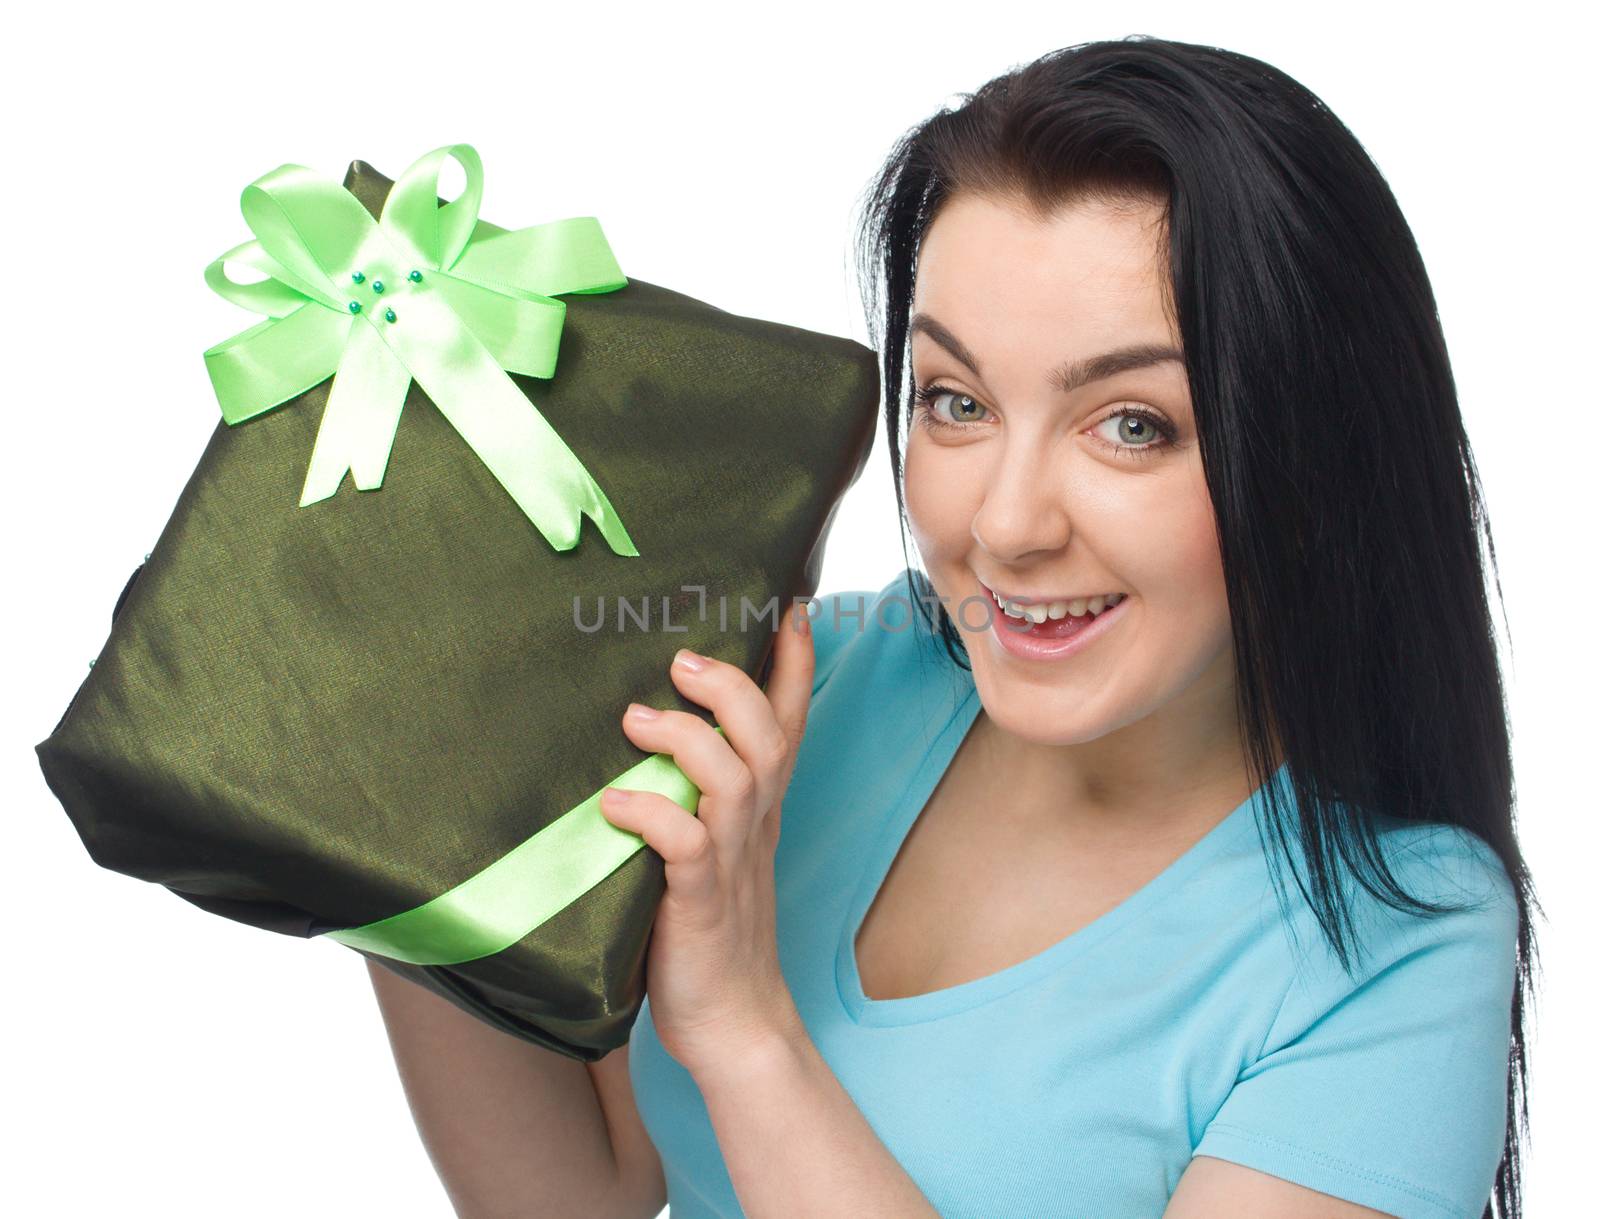 Woman holding gift box isolated on white background